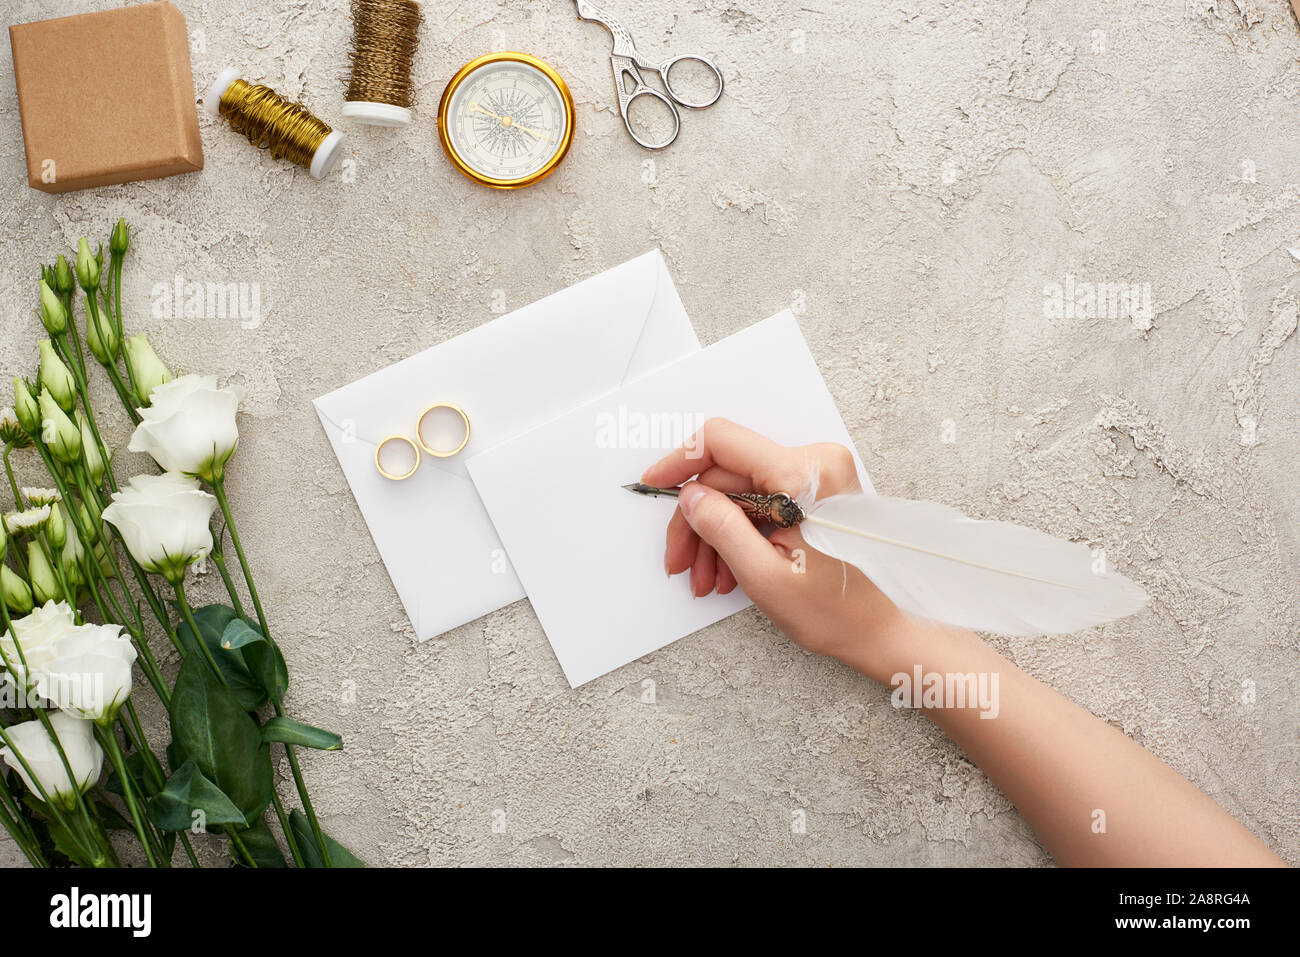 cropped view of woman writing on empty card near wedding rings, compass, scissors, bobbins and eustoma flowers on textured surface Stock Photo